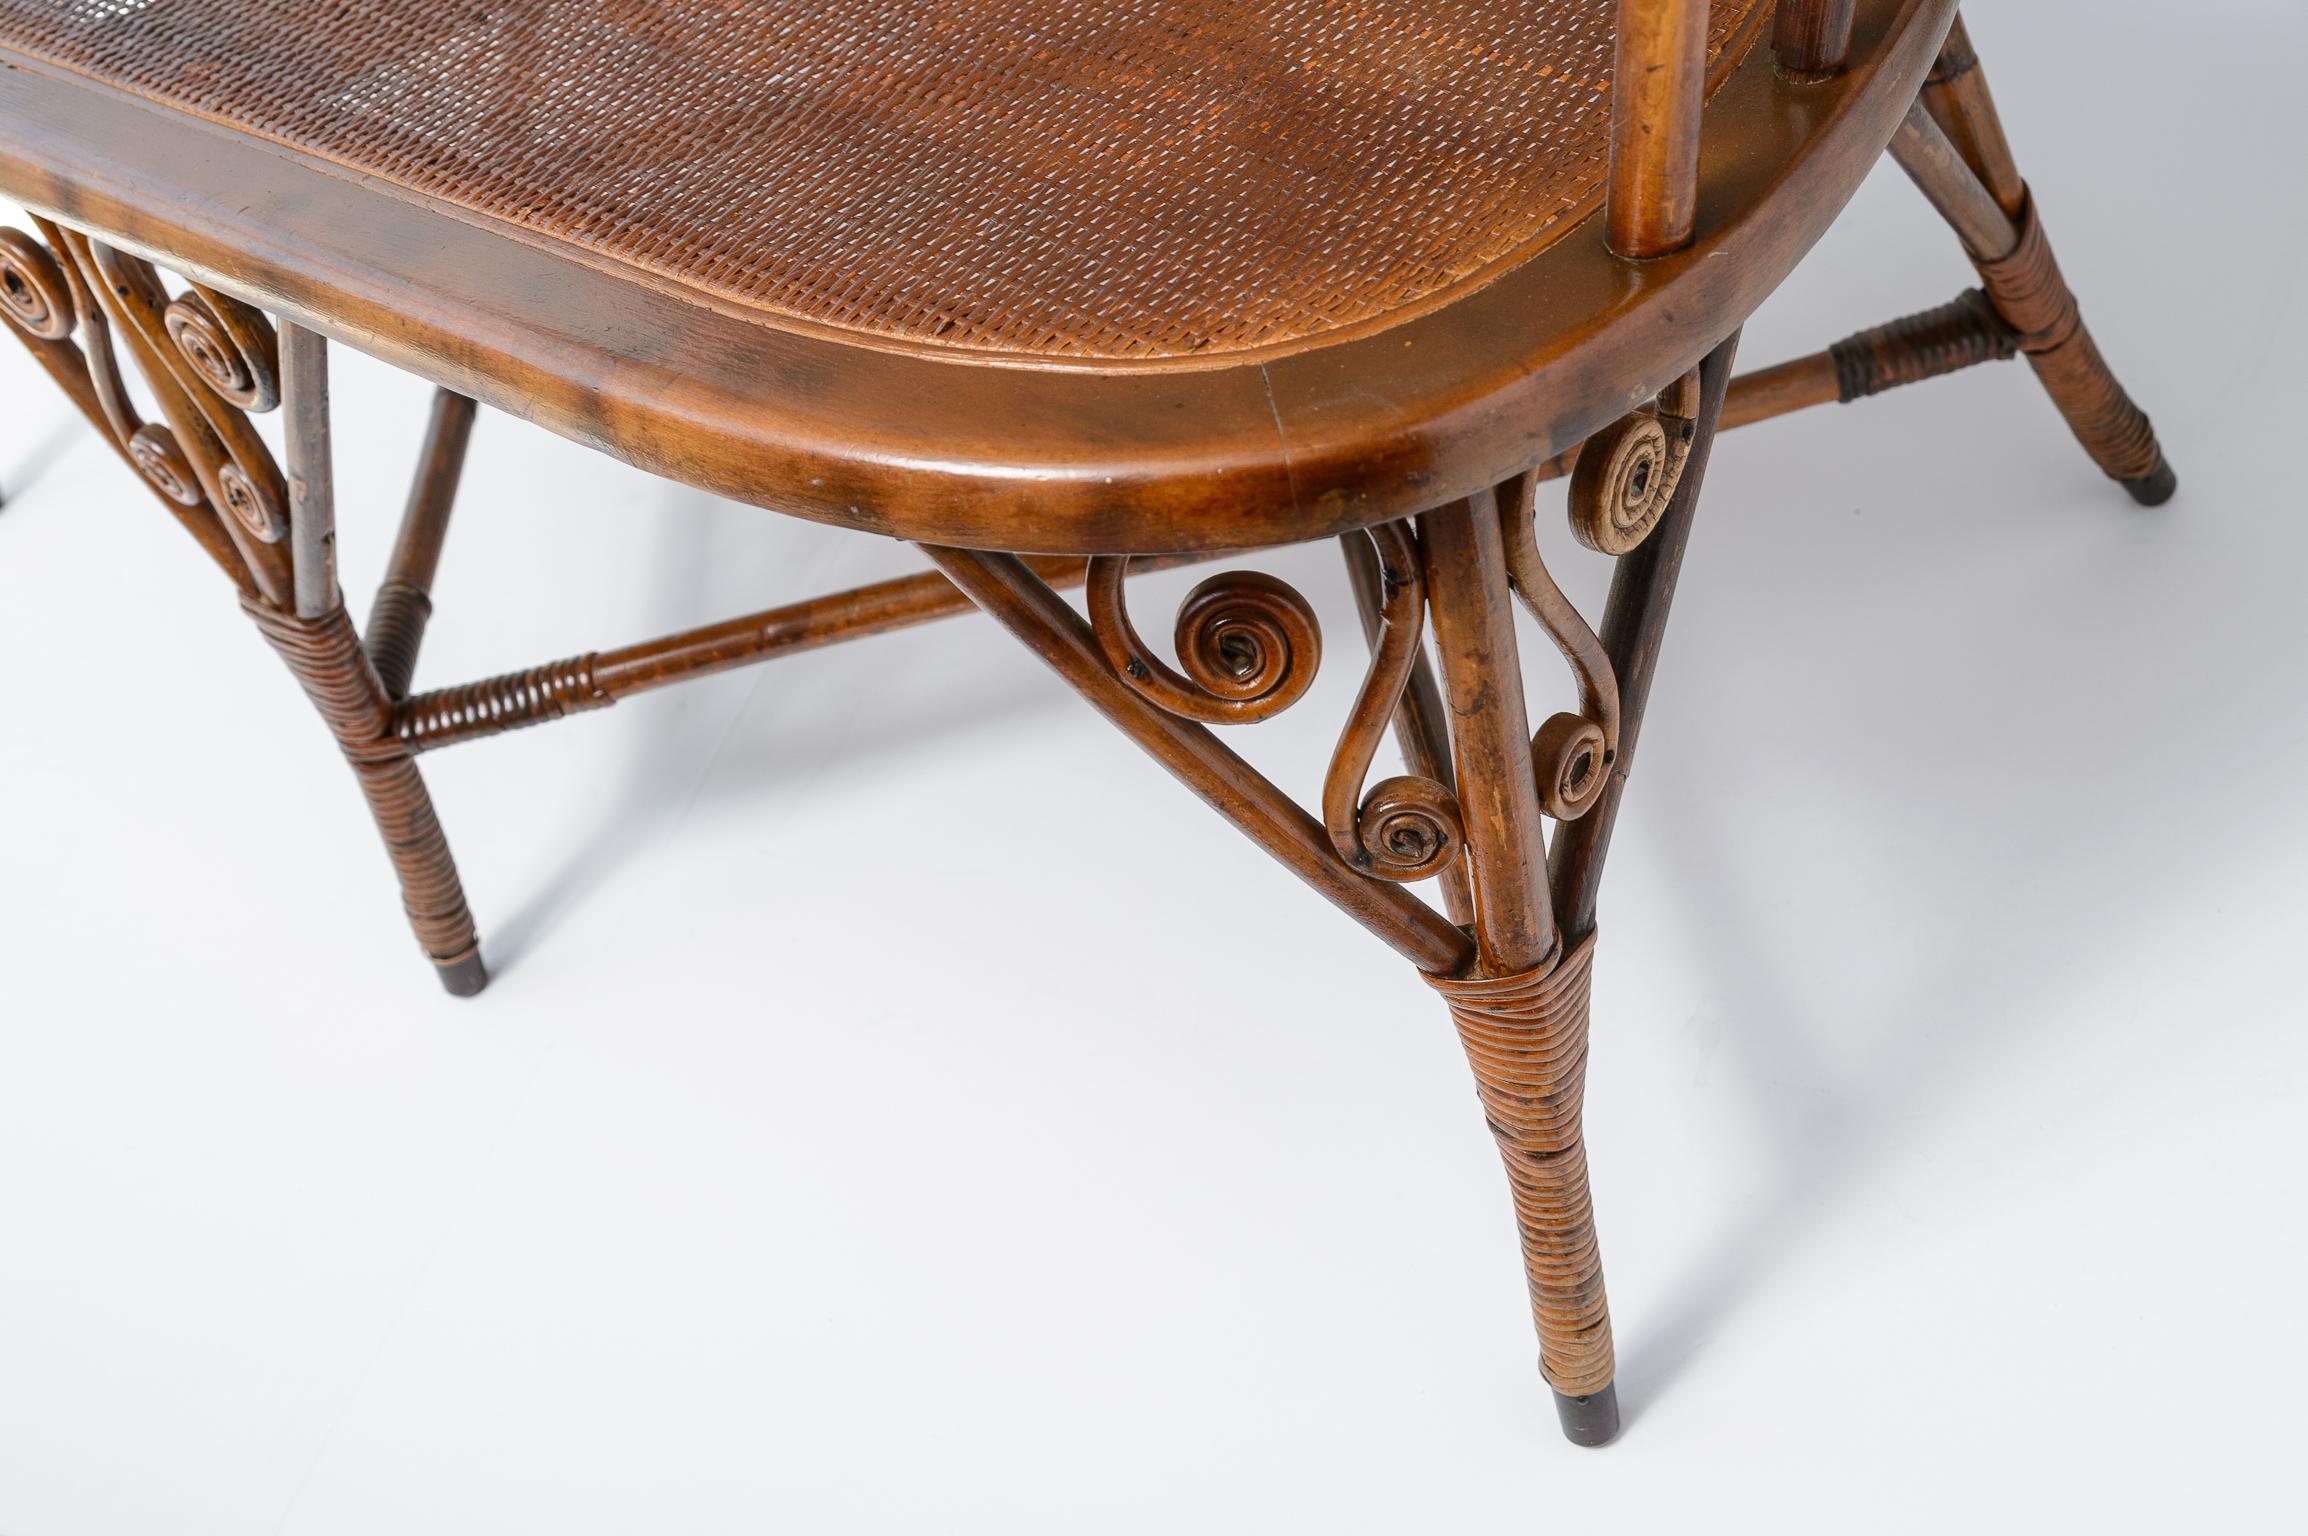 Antique Bentwood & Cane Settee, Attributed to Michael Thonet, C1900-1920s For Sale 4